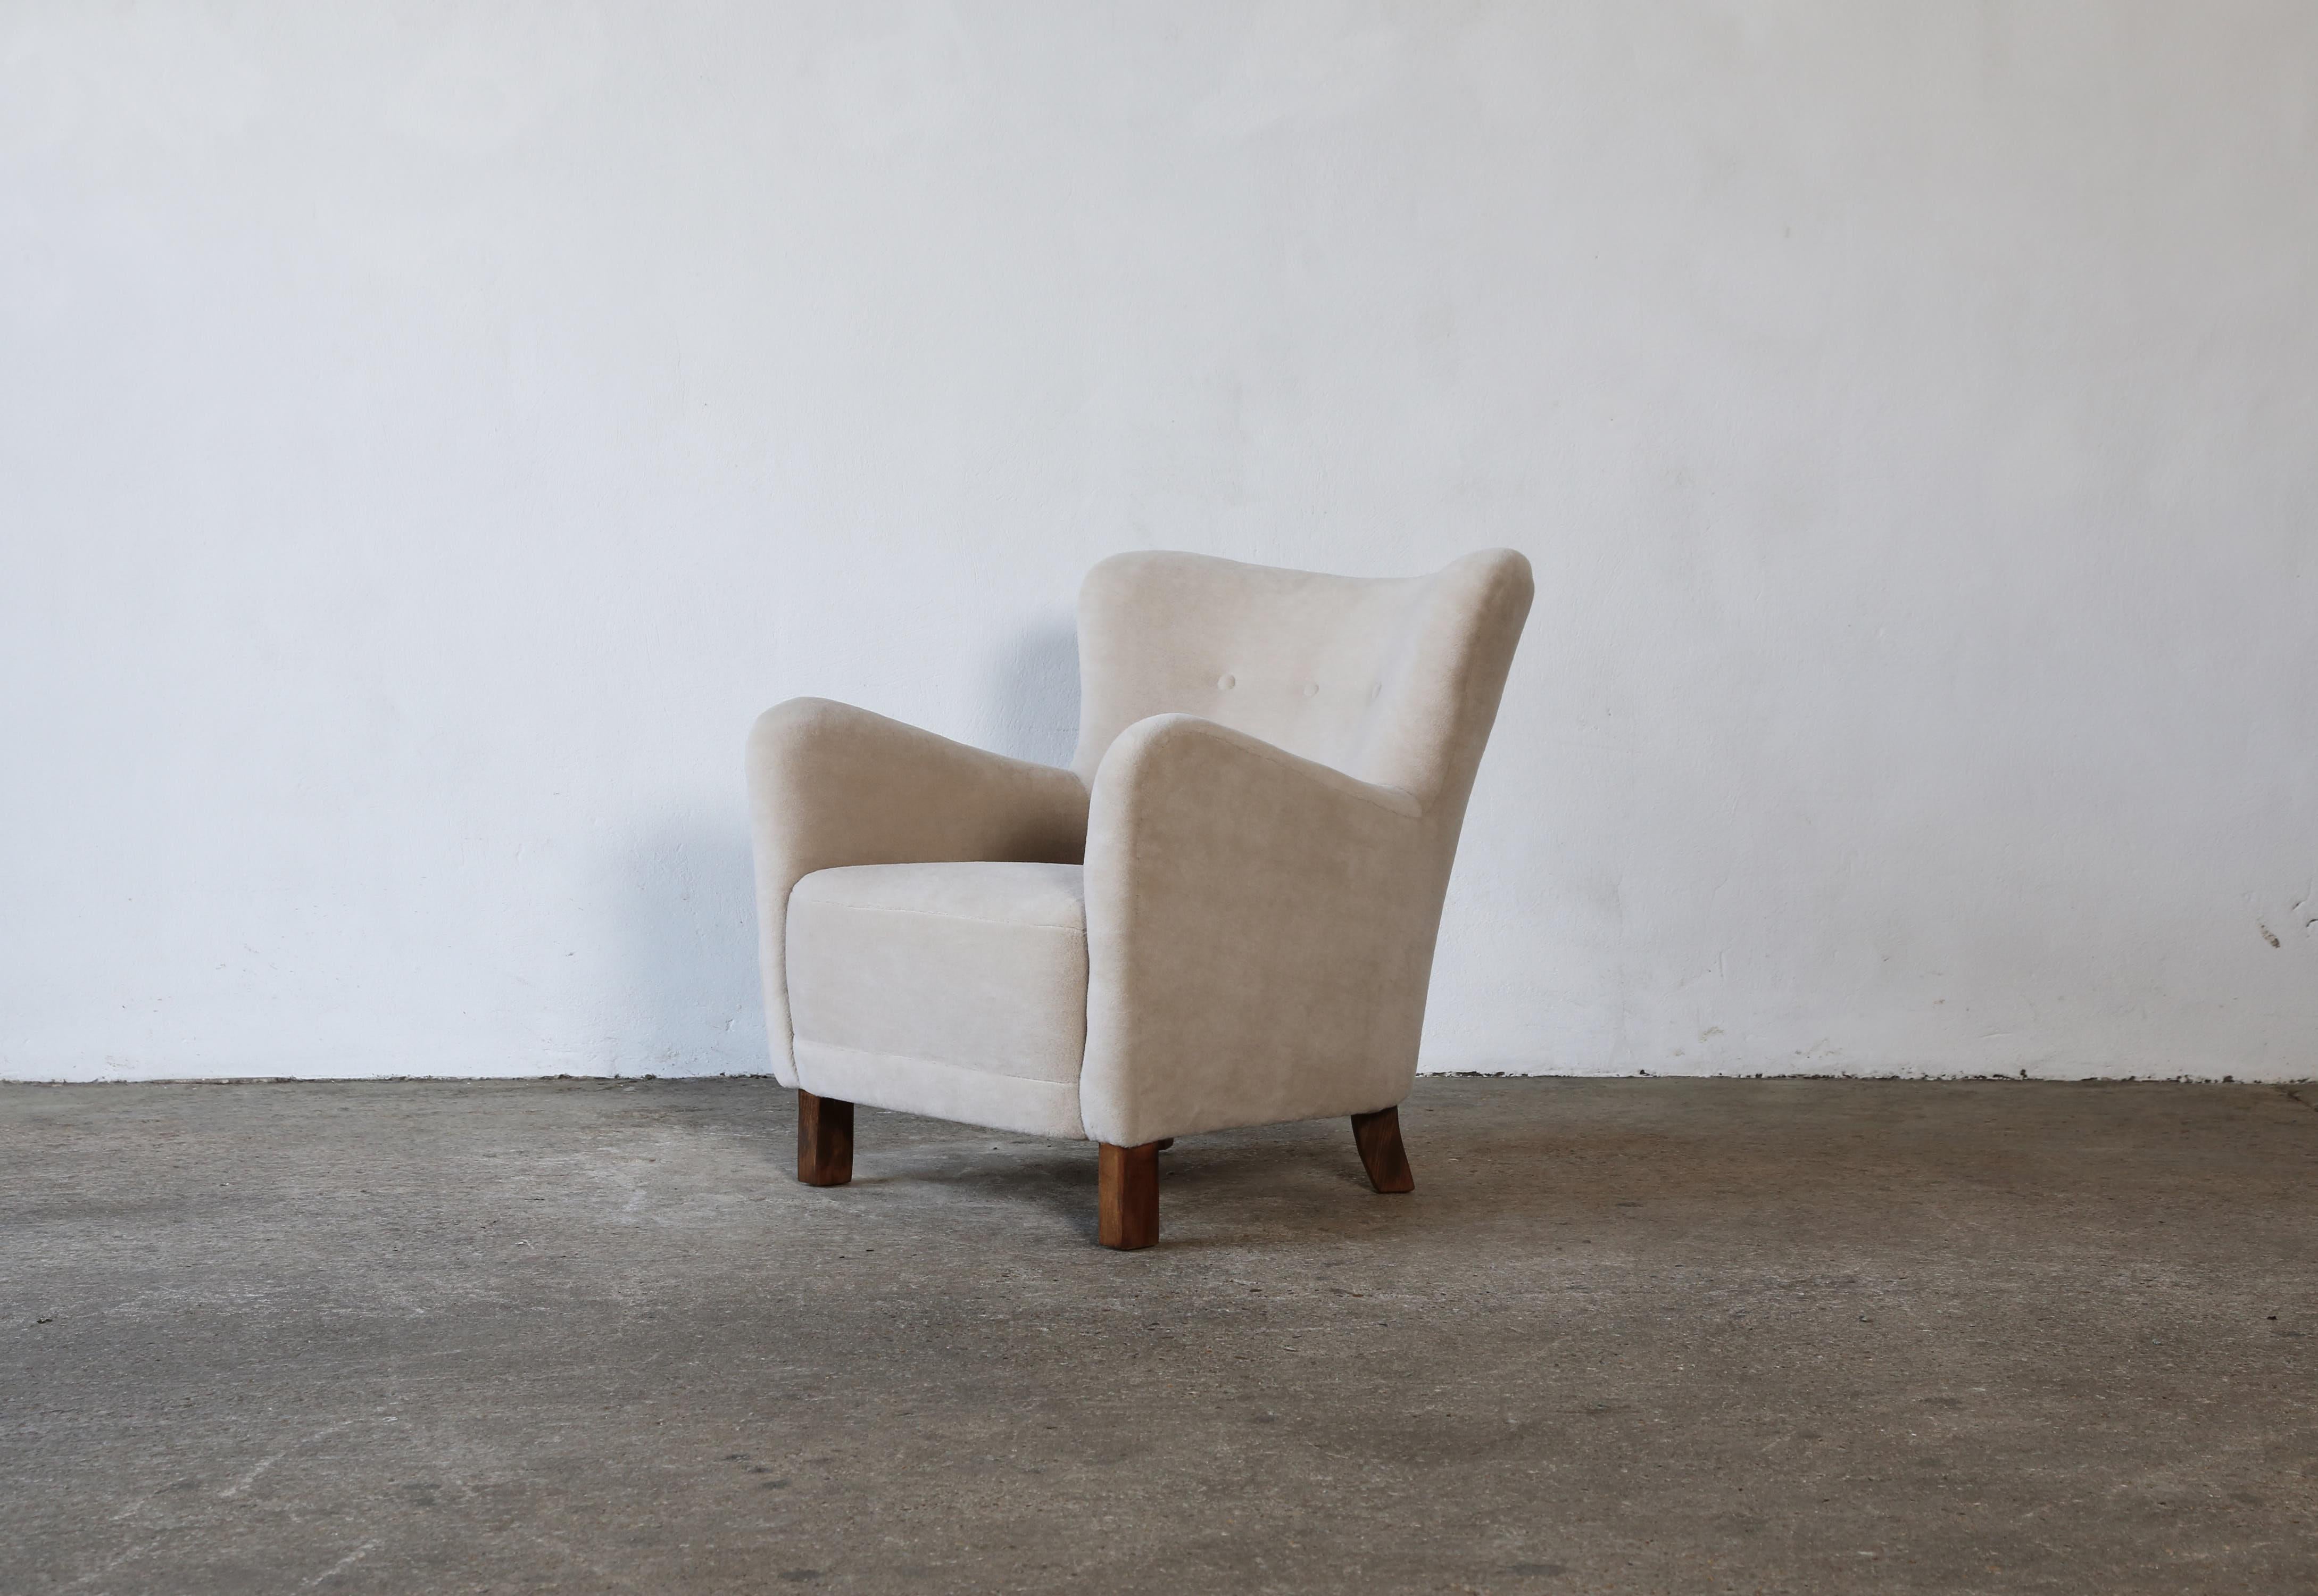 Fritz Hansen 1669 Variant Armchair, Reupholstered in Pure Alpaca, Denmark, 1940s. Newly upholstered in a premium, soft, ivory pure alpaca wool.
  


